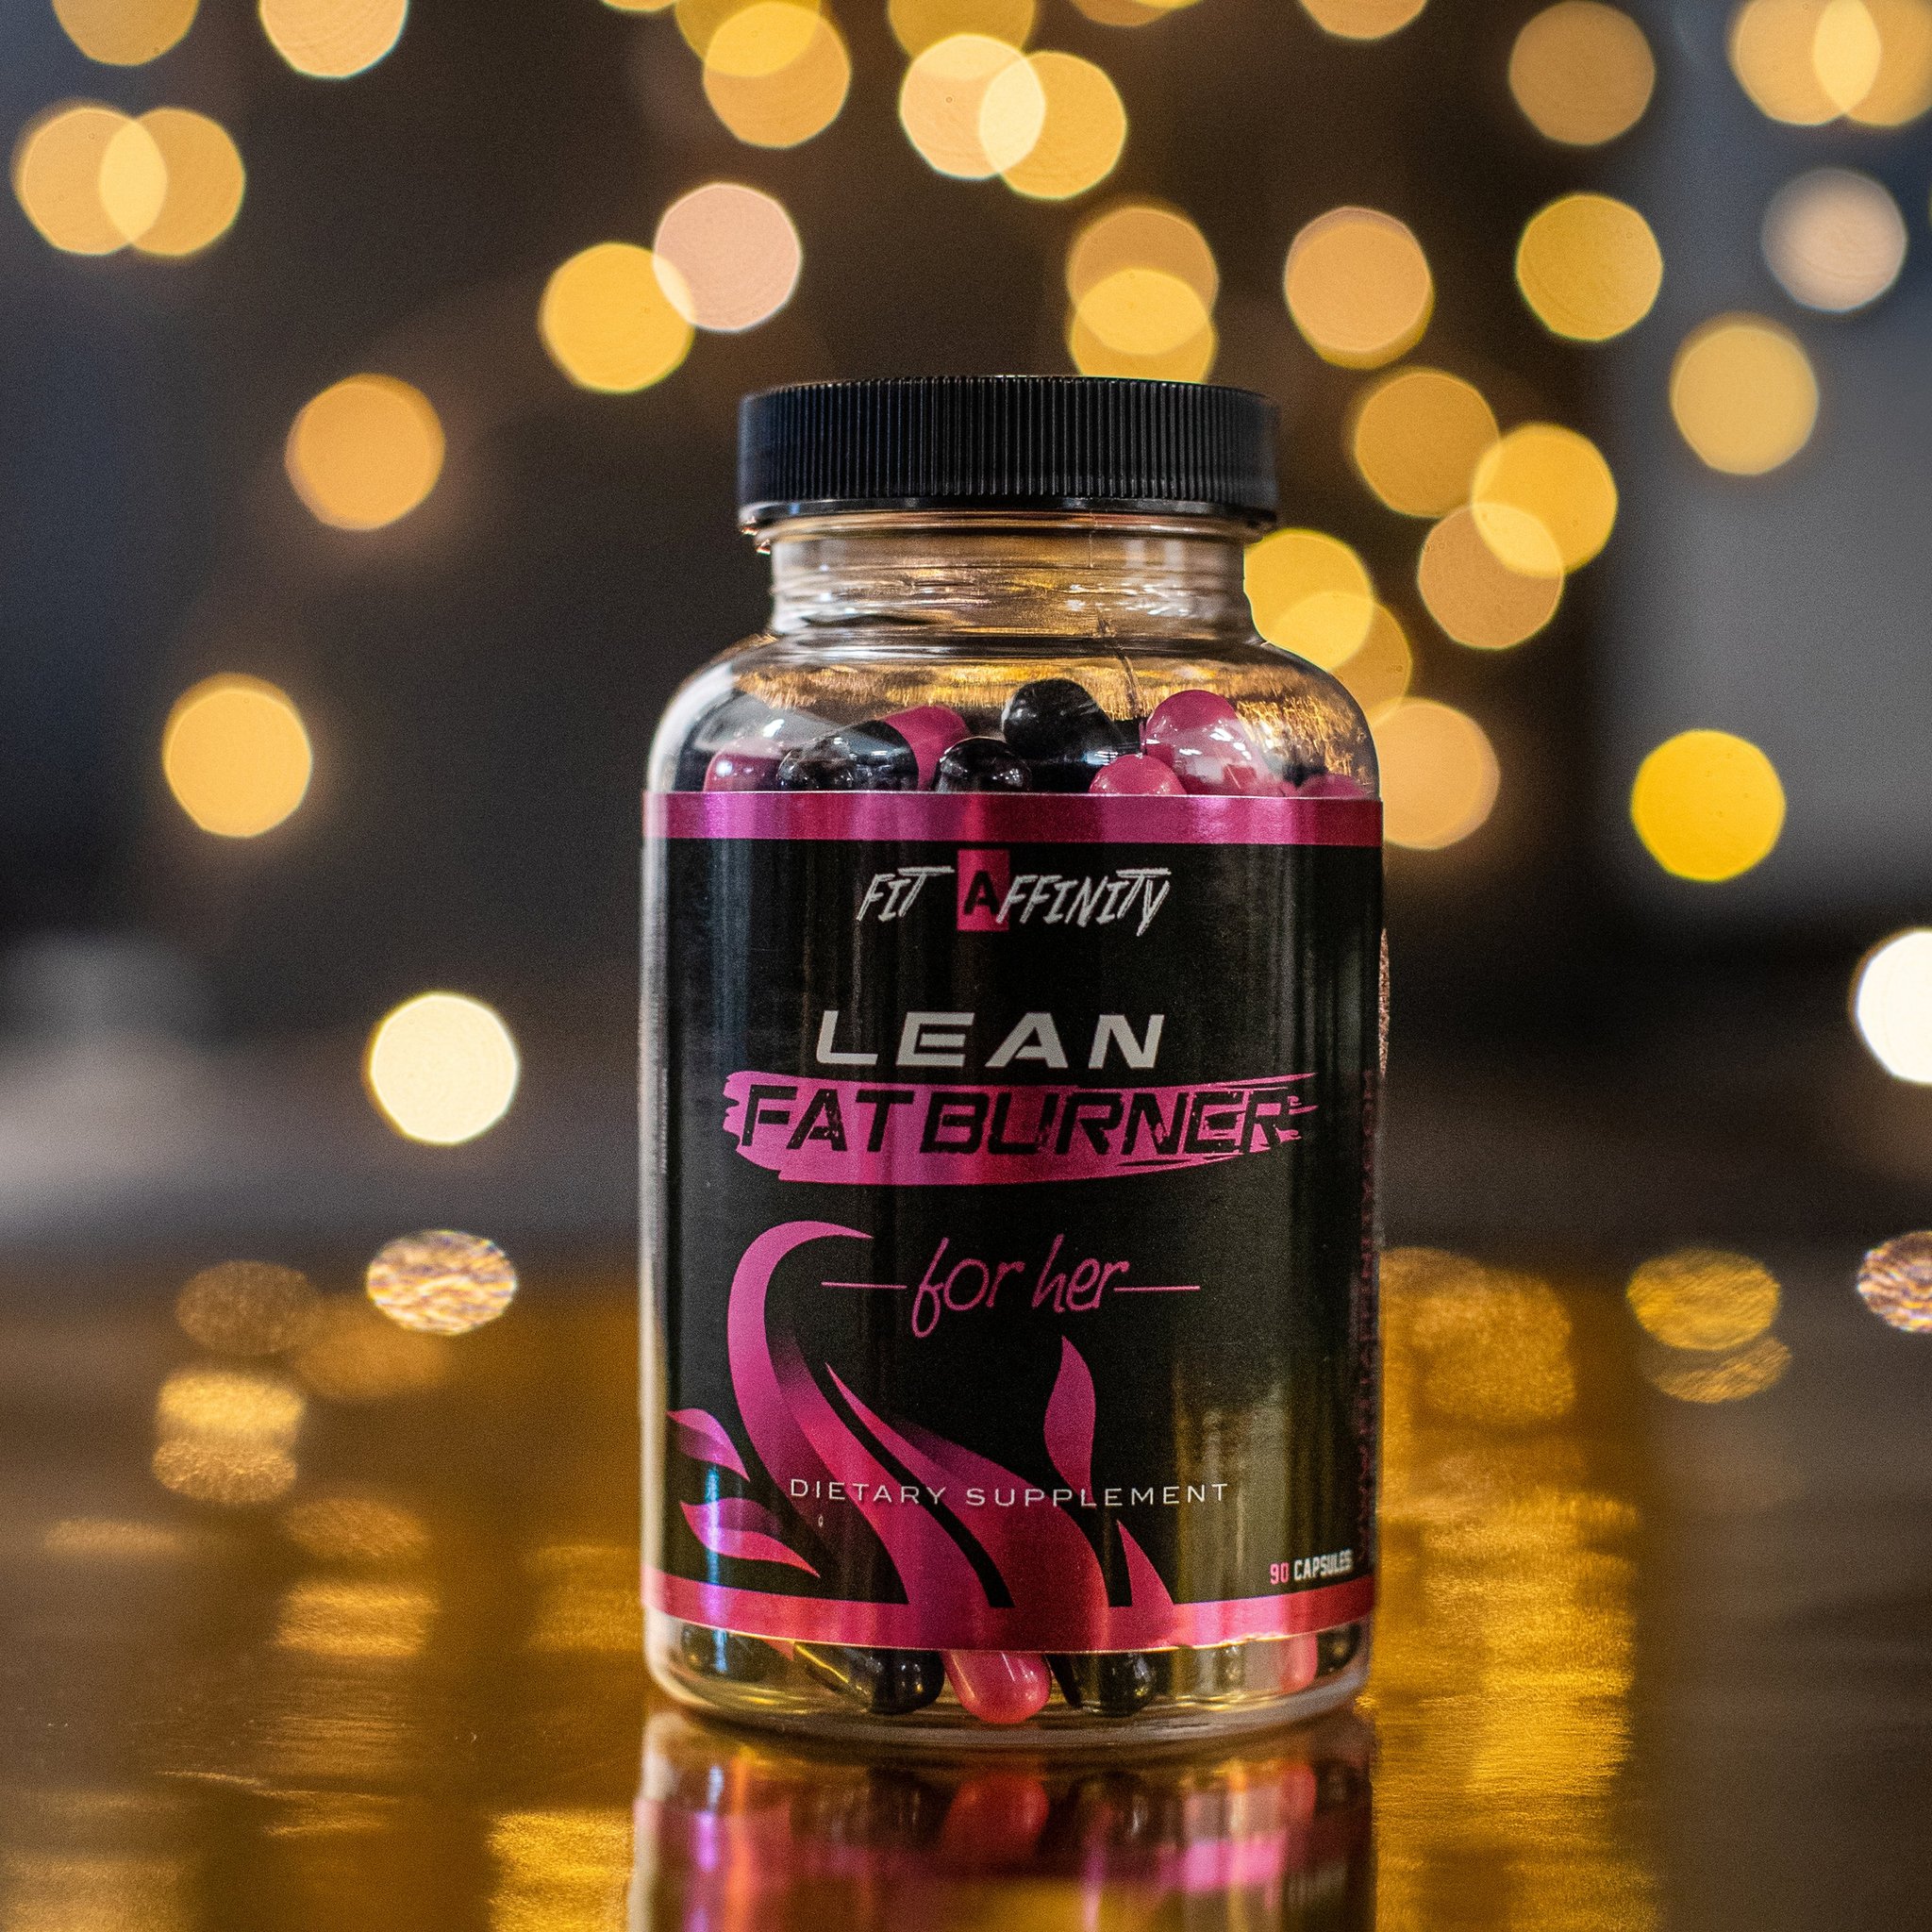 Lean Fat Burner for Her Review Product2